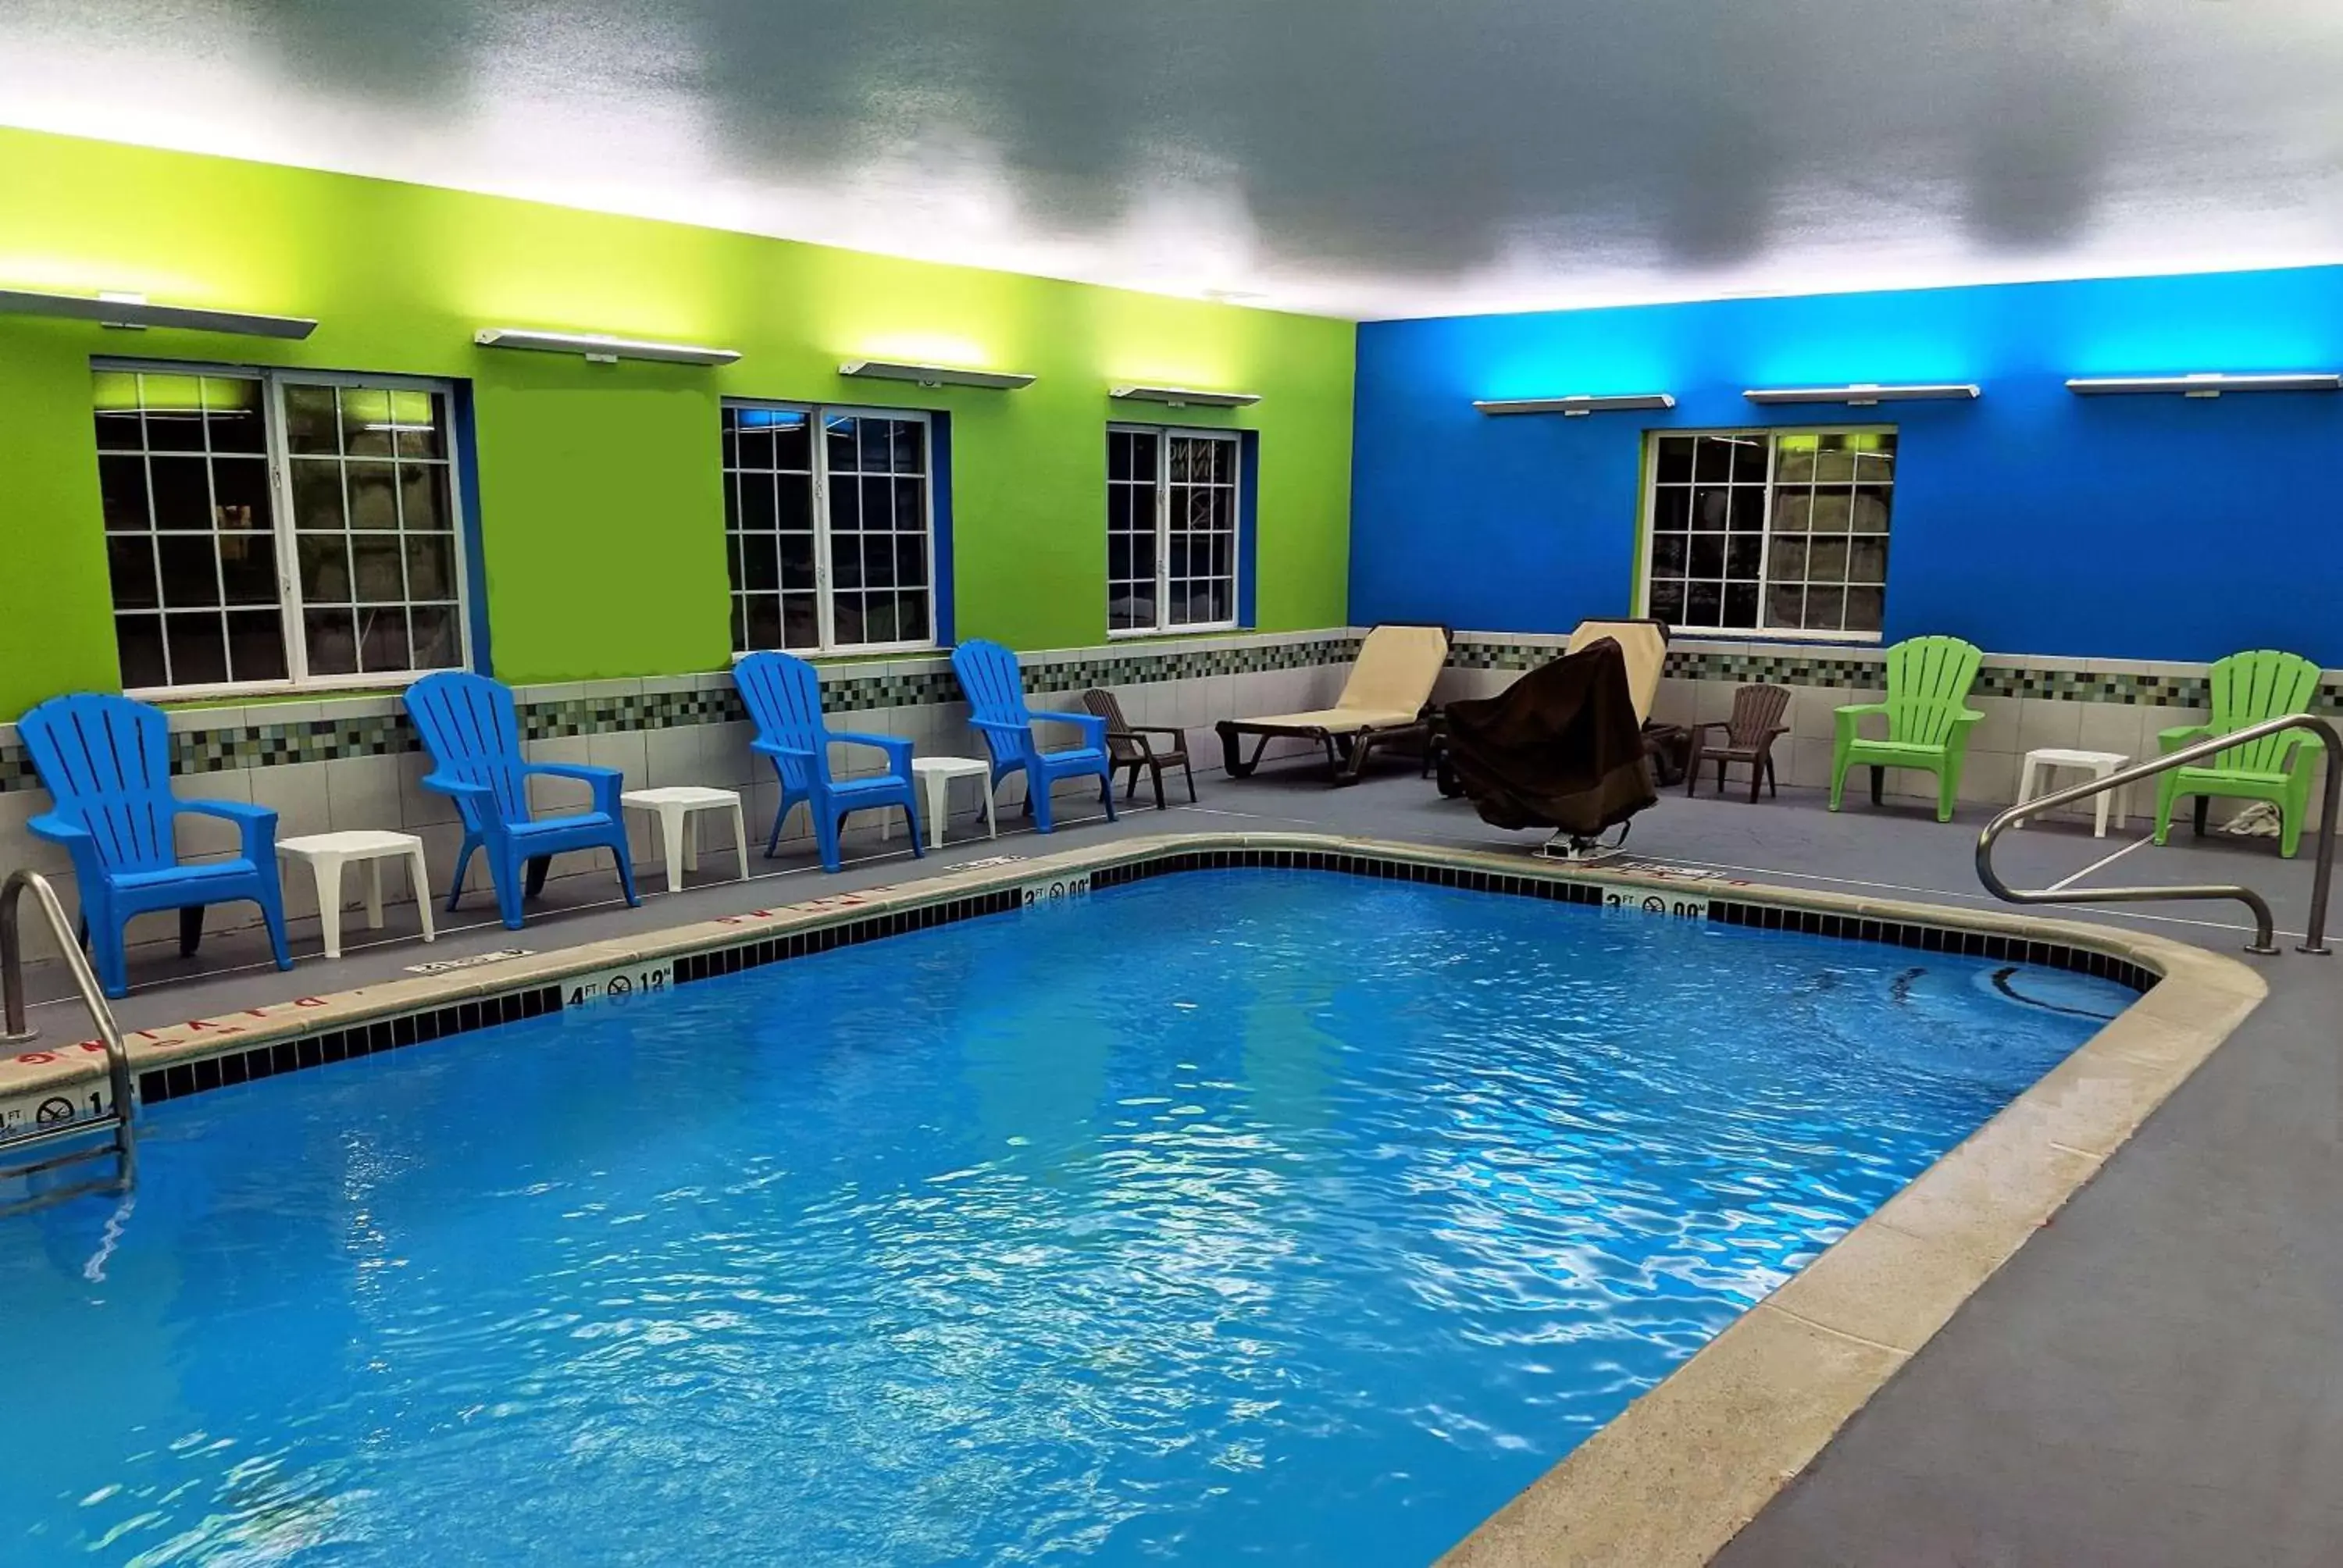 Activities in Microtel Inn & Suites by Wyndham Michigan City